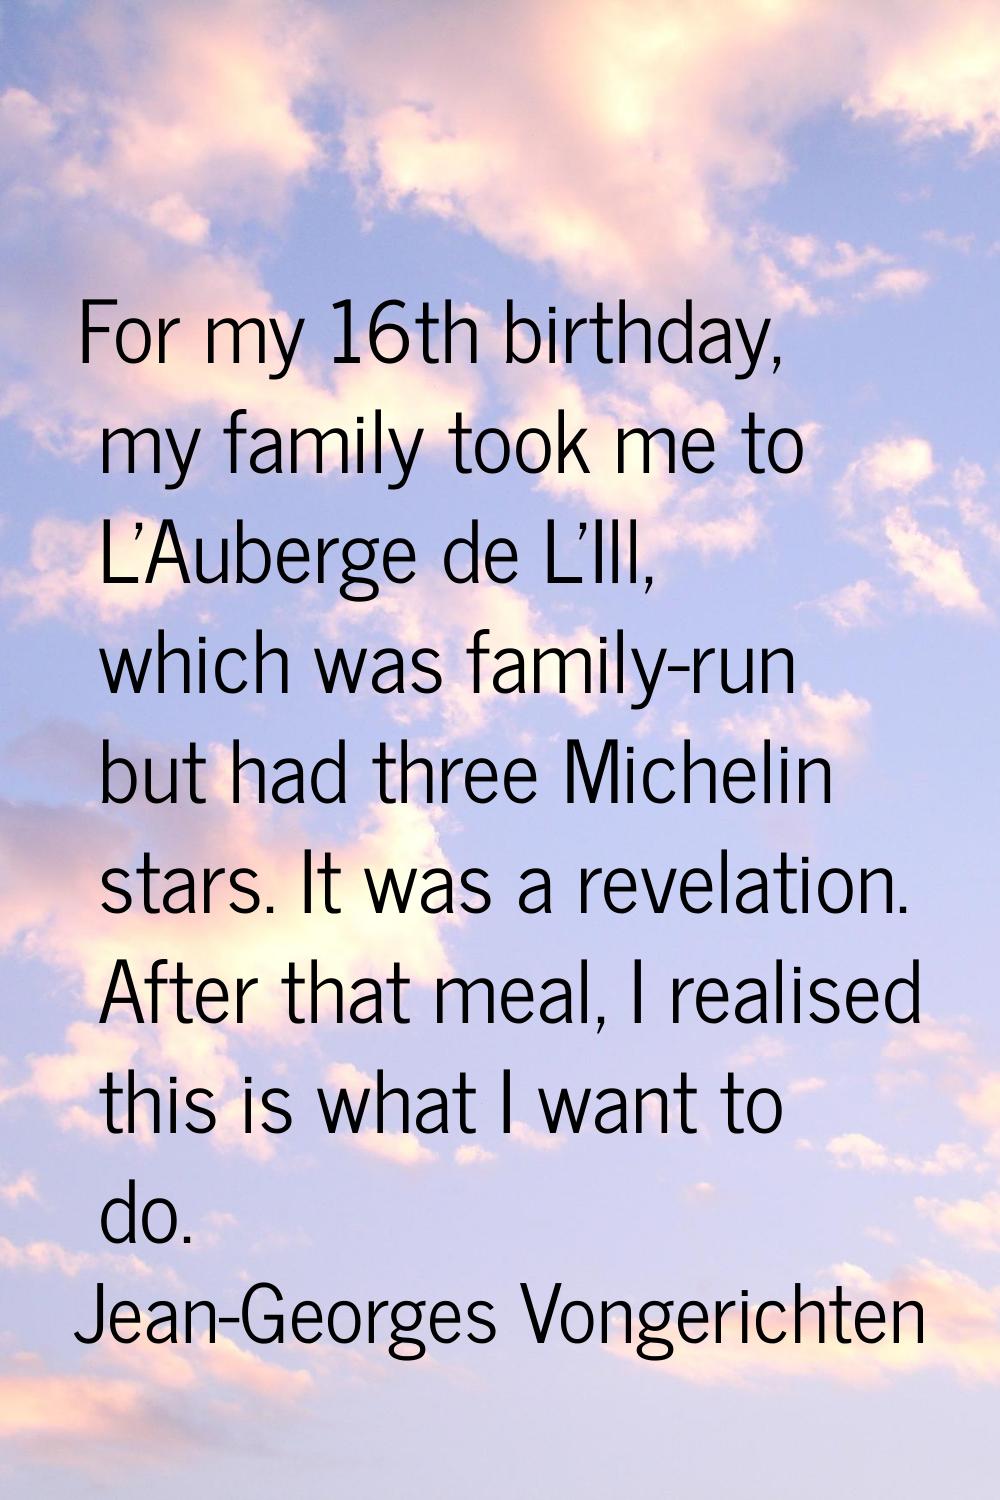 For my 16th birthday, my family took me to L'Auberge de L'Ill, which was family-run but had three M